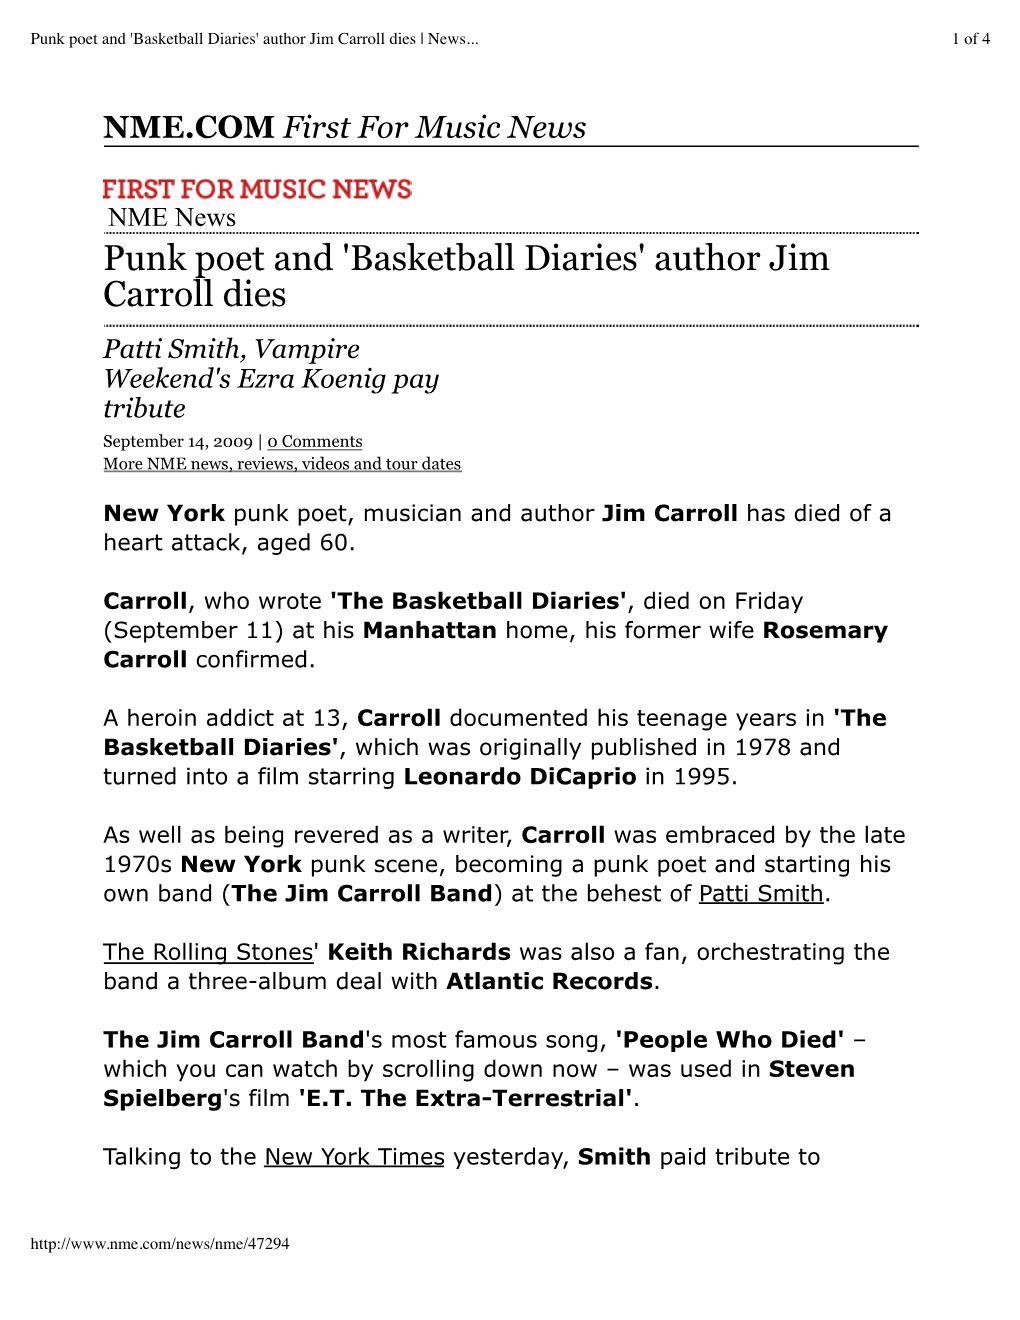 “Punk Poet and 'Basketball Diaries' Author Jim Carroll Dies | News